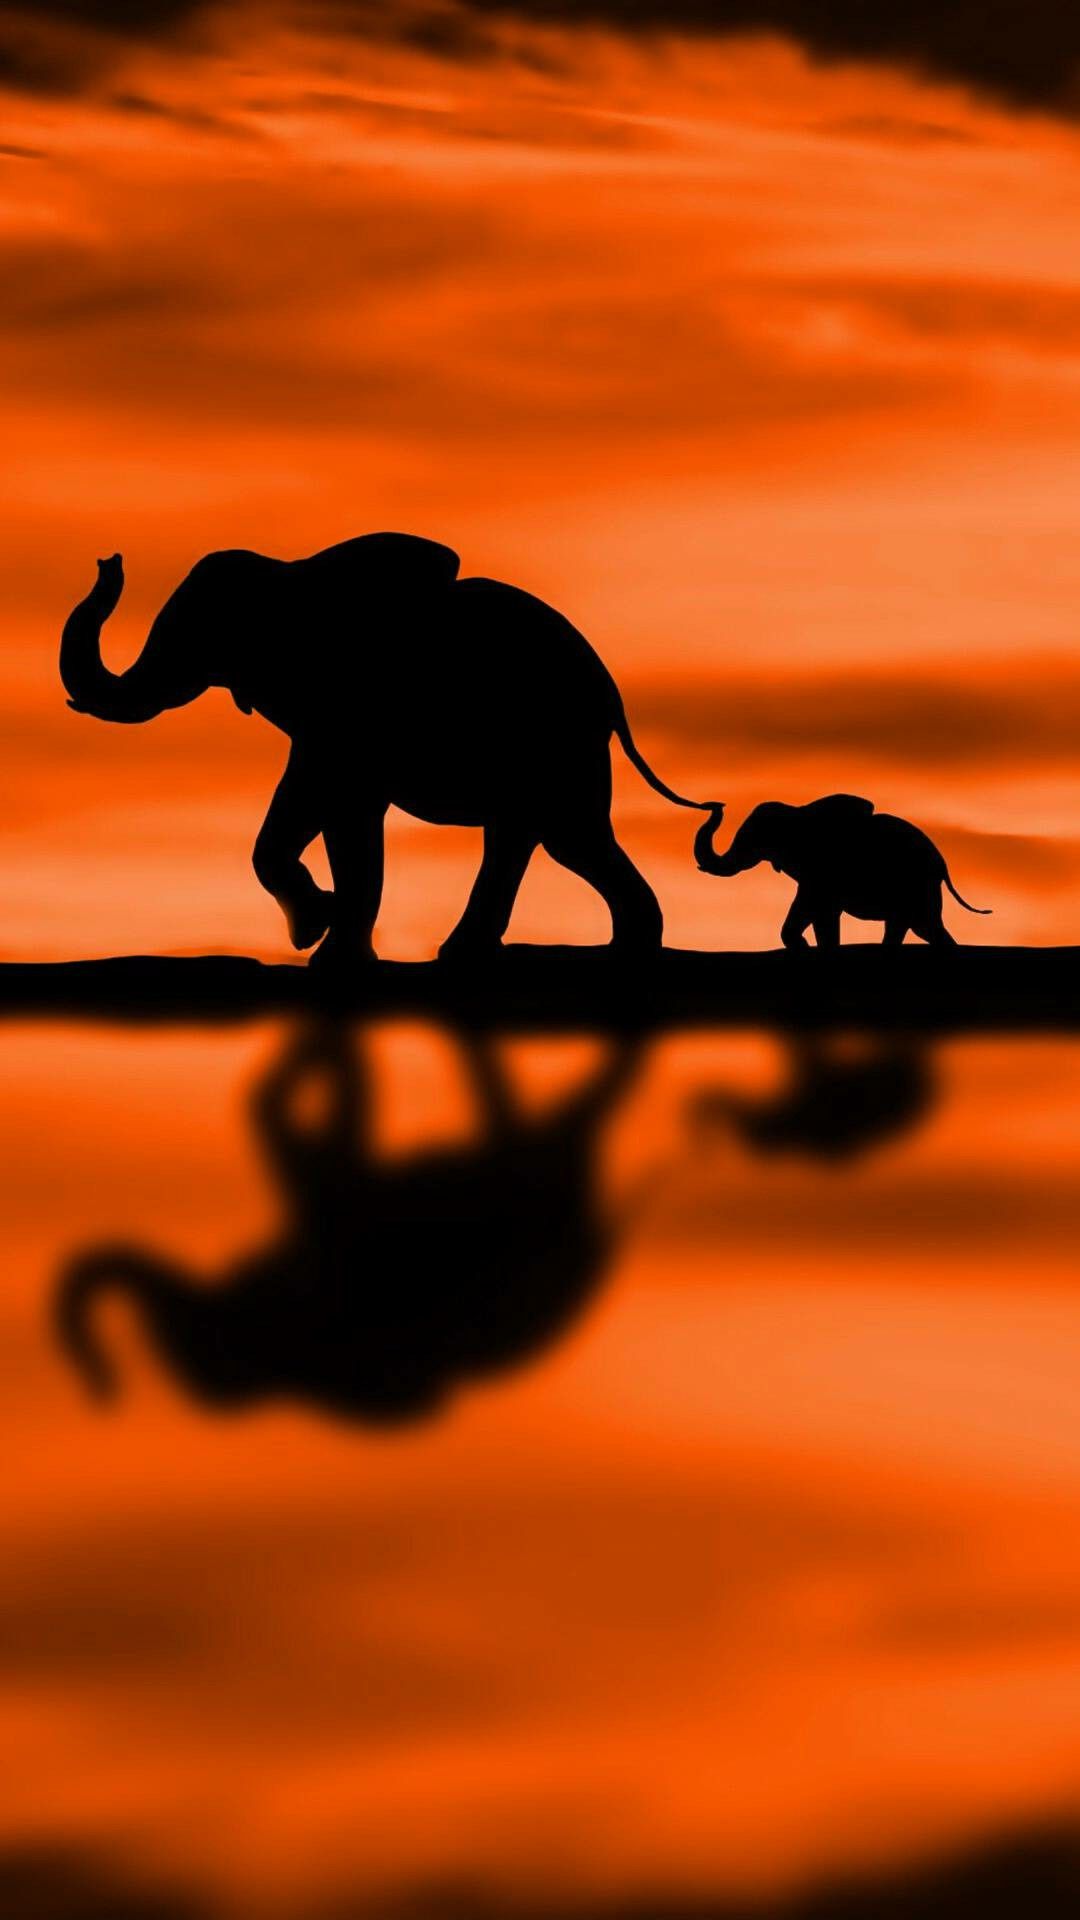 A baby elephant following its mother on a beautiful orange